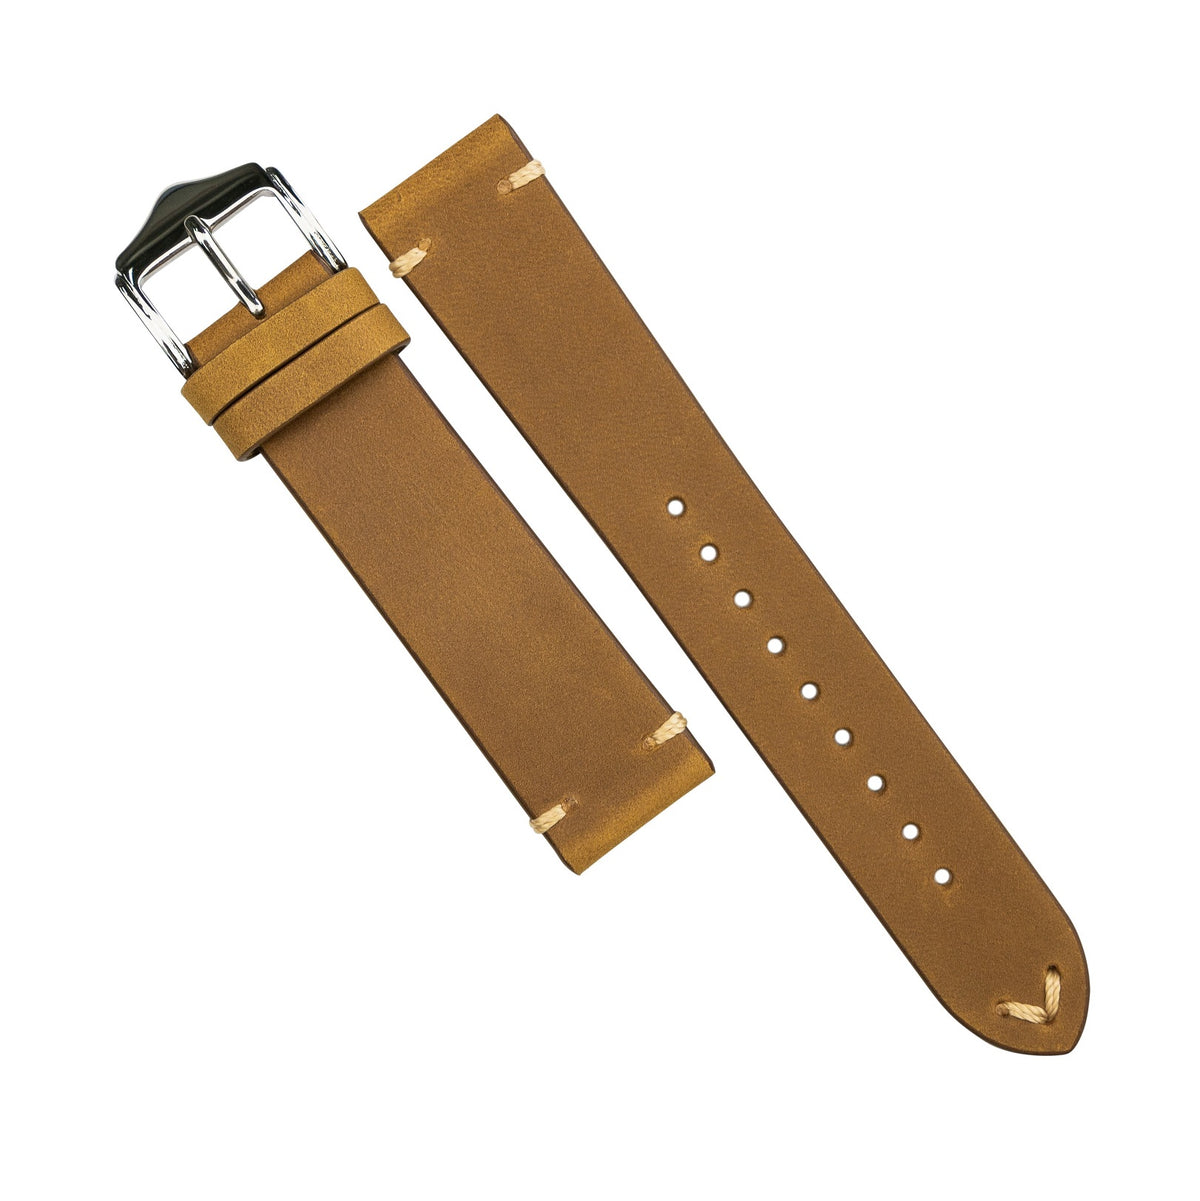 Premium Vintage Calf Leather Watch Strap in Tan (20mm) - Nomad Watch Works SG